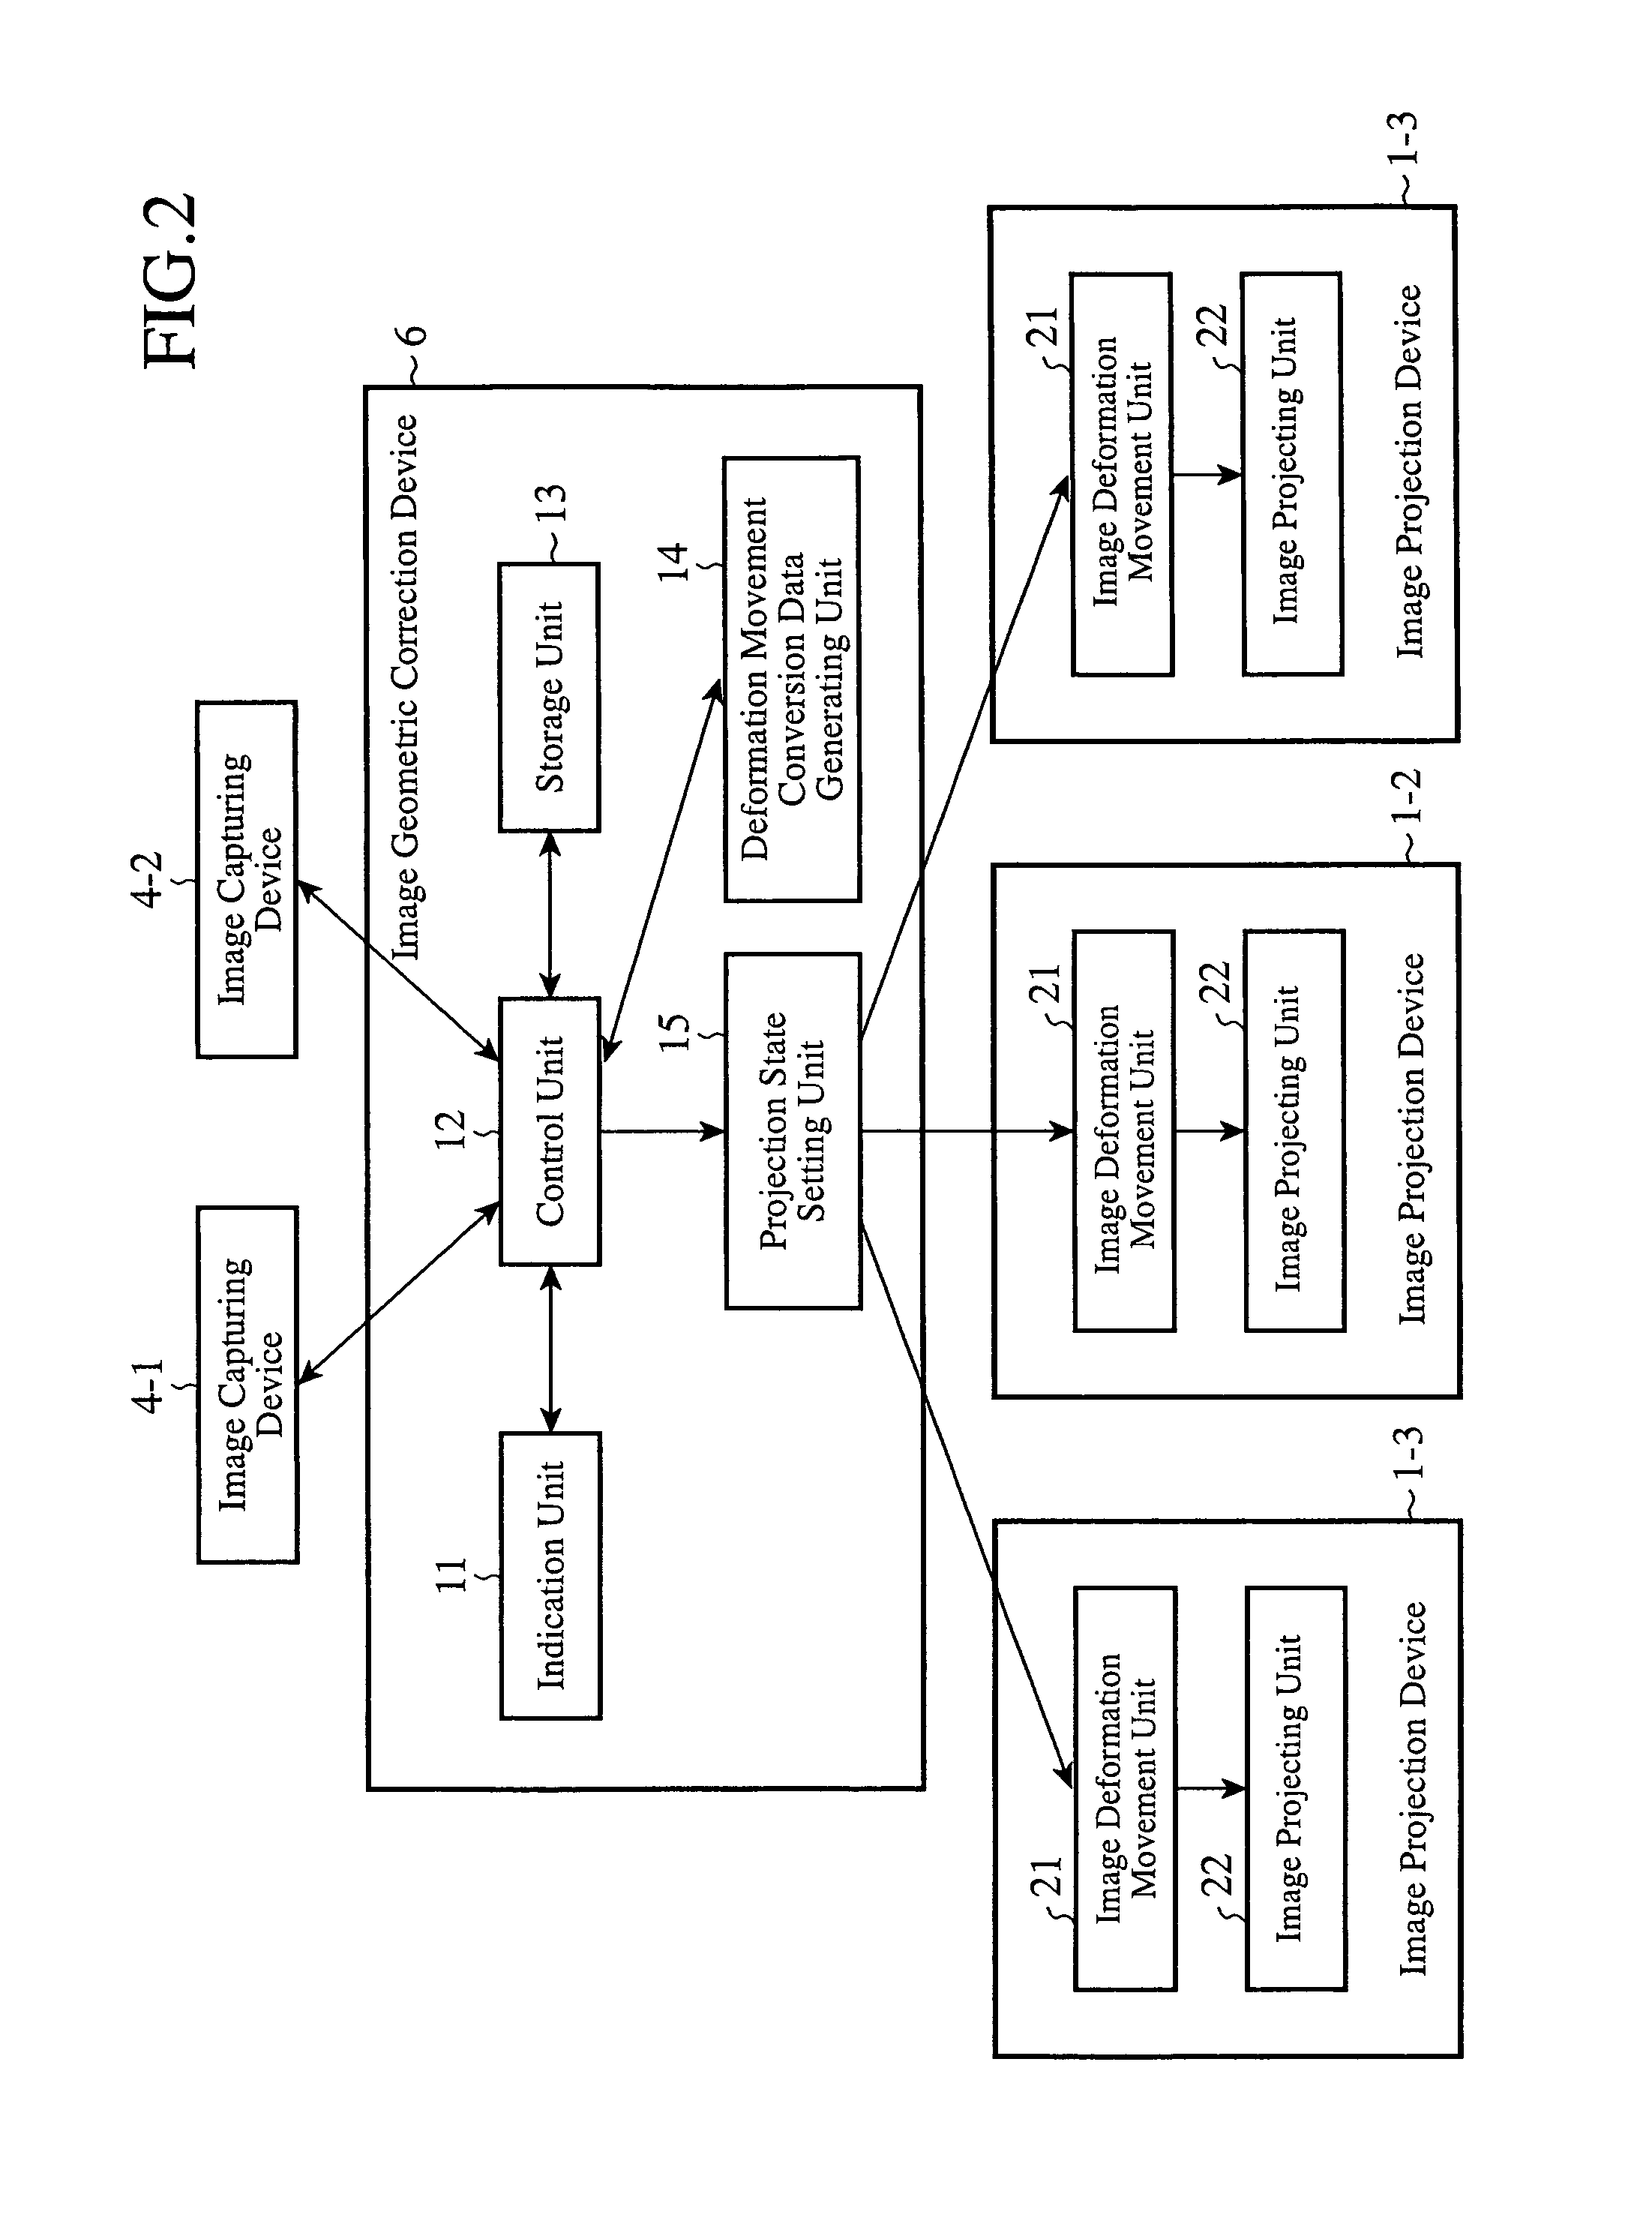 Image Projection system and image geometric correction device